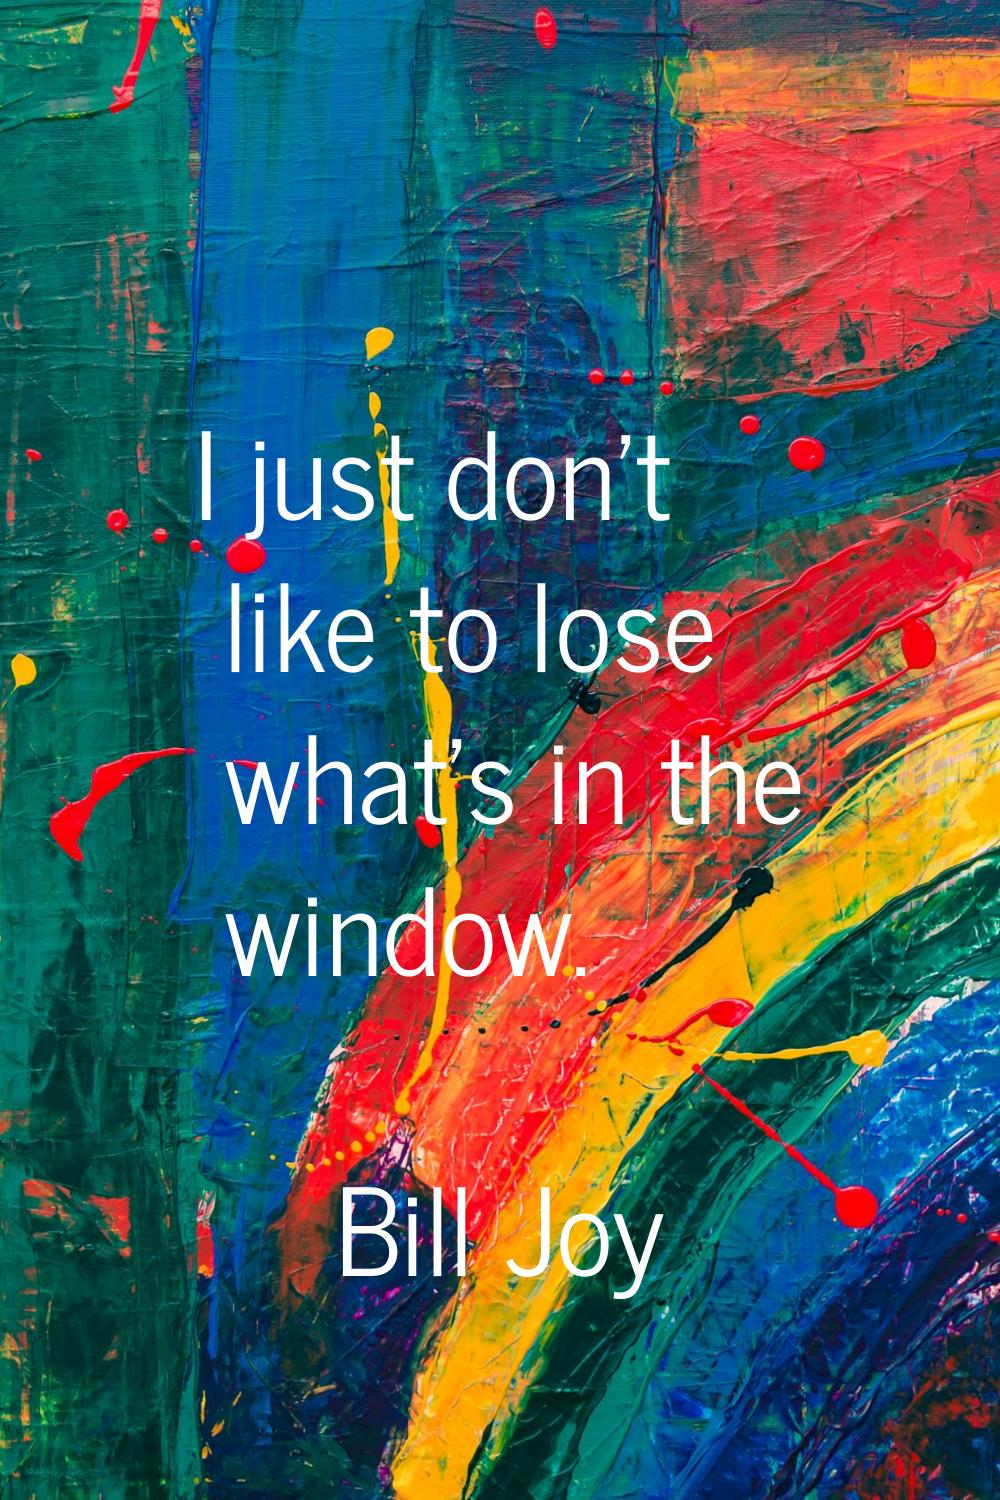 I just don't like to lose what's in the window.